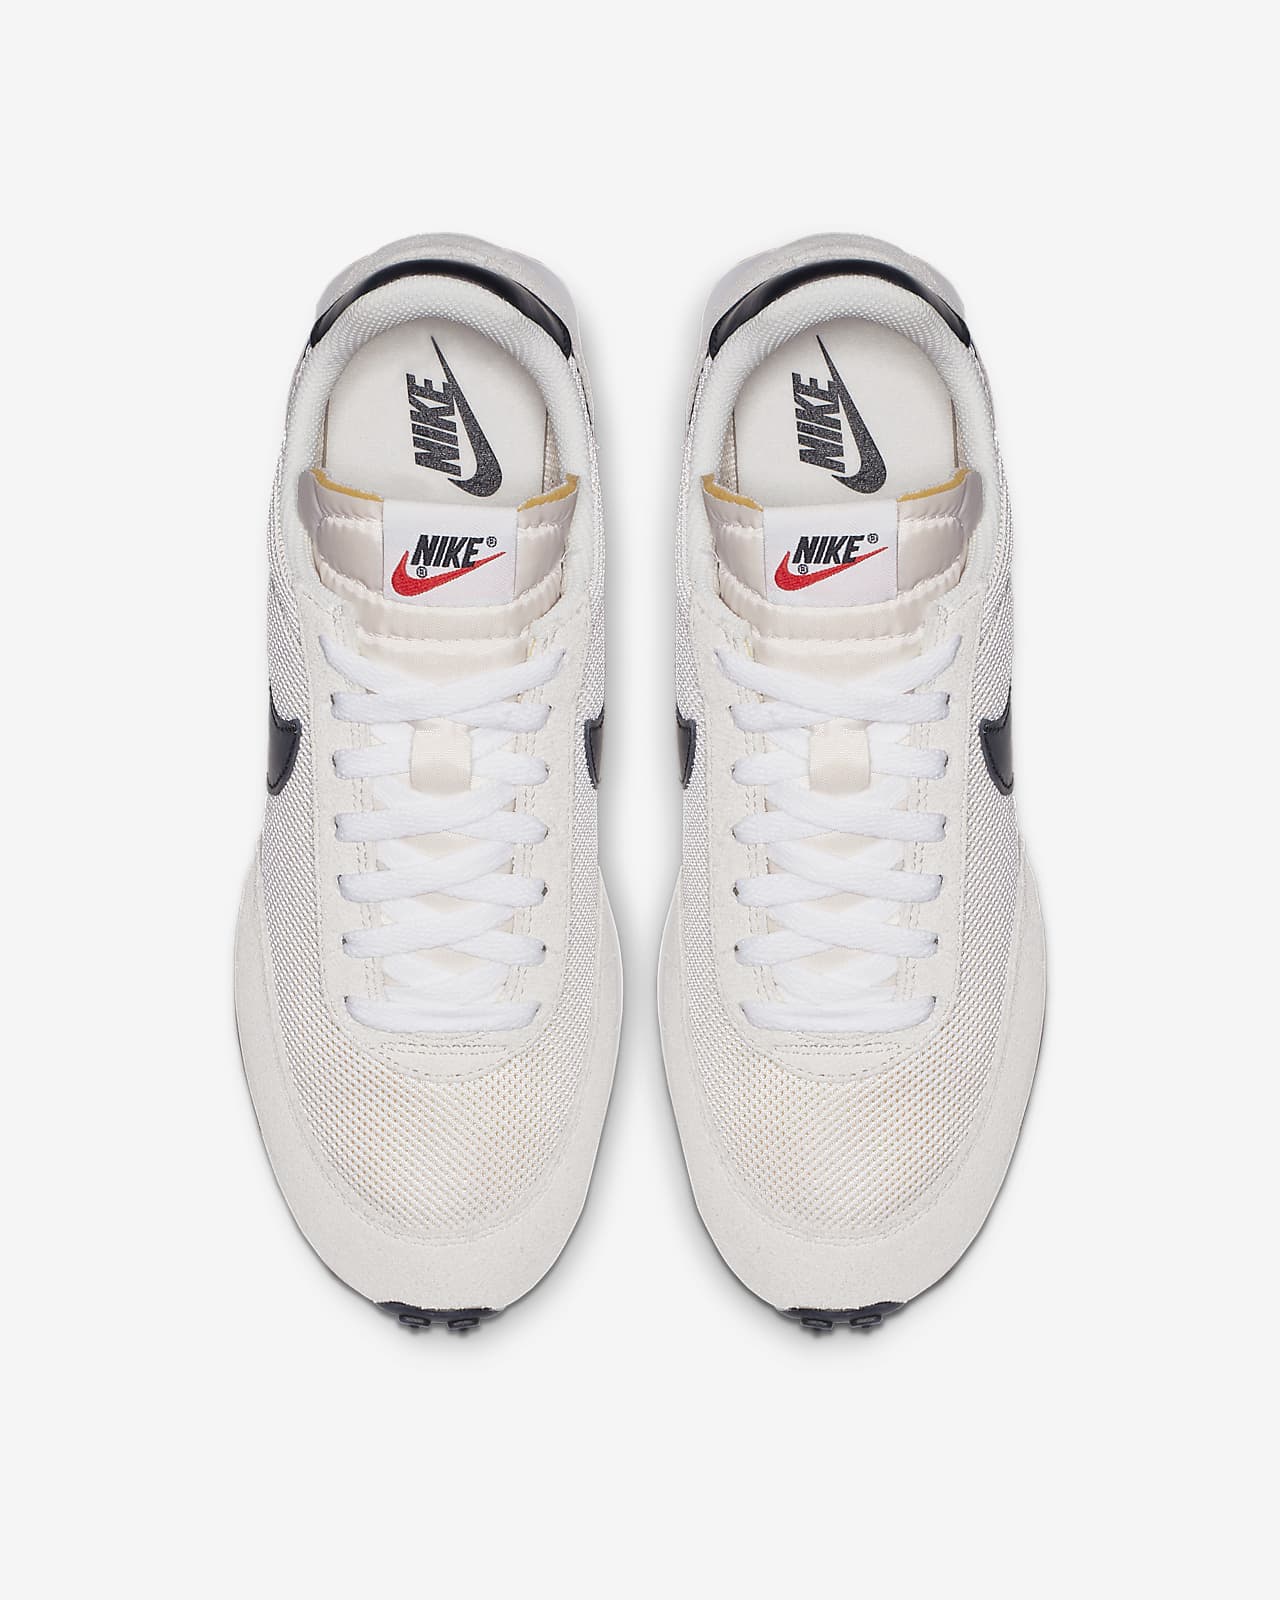 Nike Air Tailwind 79 Shoes